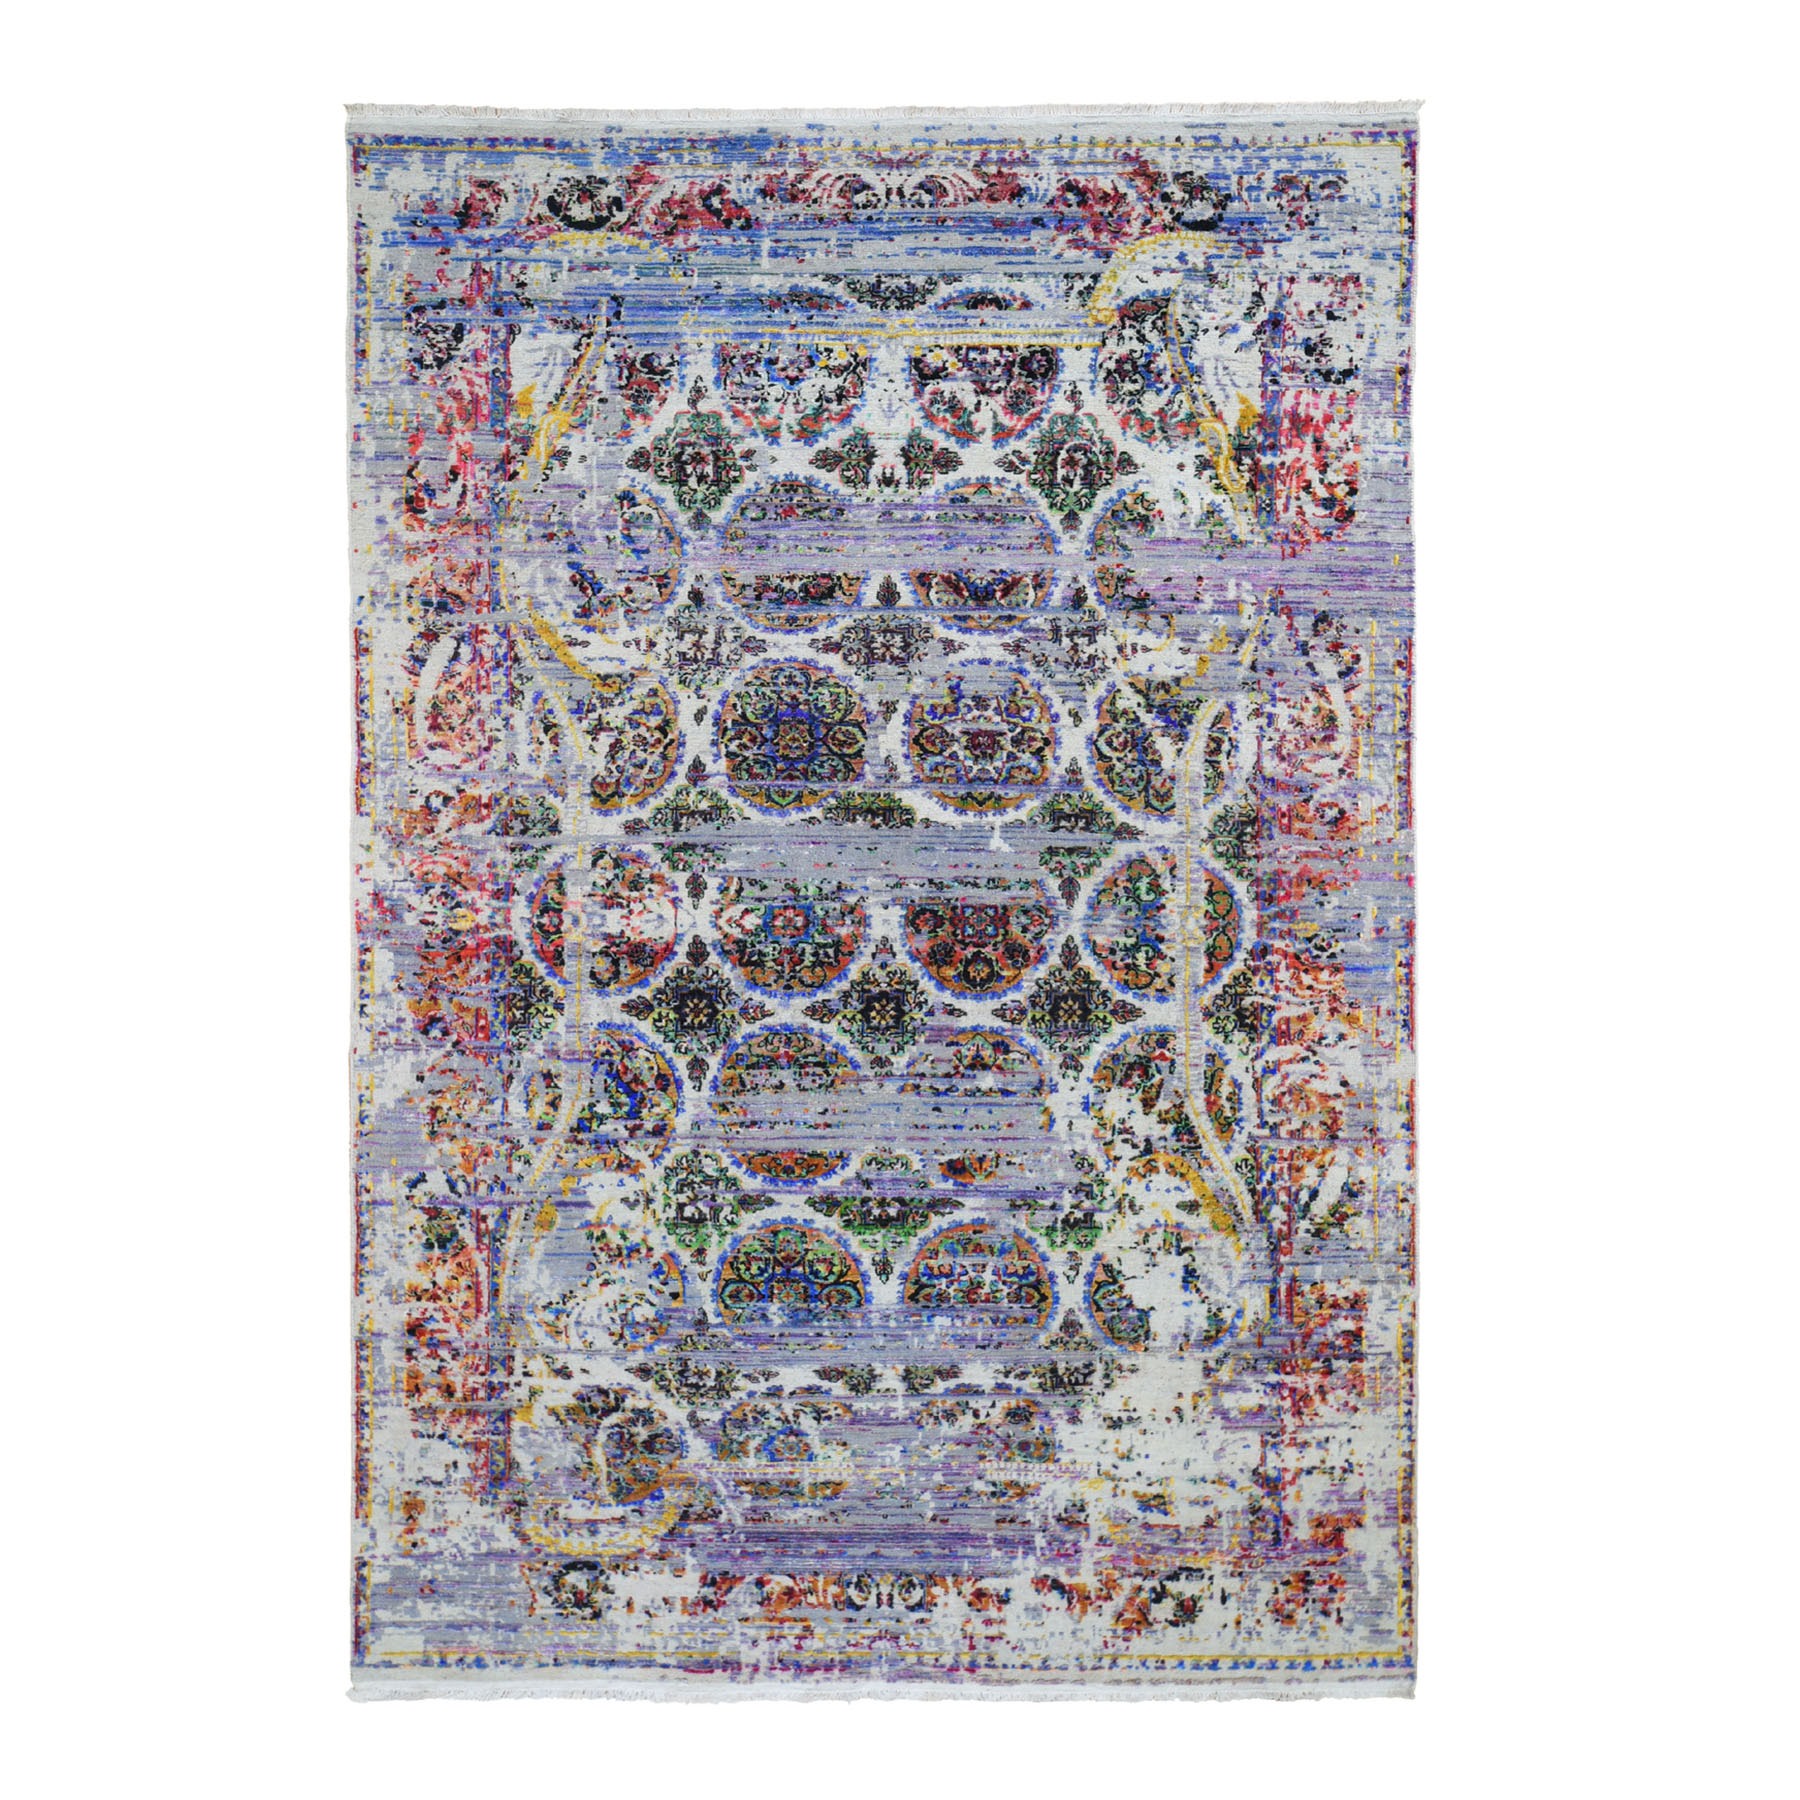 6'x9'1" ERASED ROSSETS, Colorful Sari Silk With Textured Wool Hand Woven Oriental Rug 